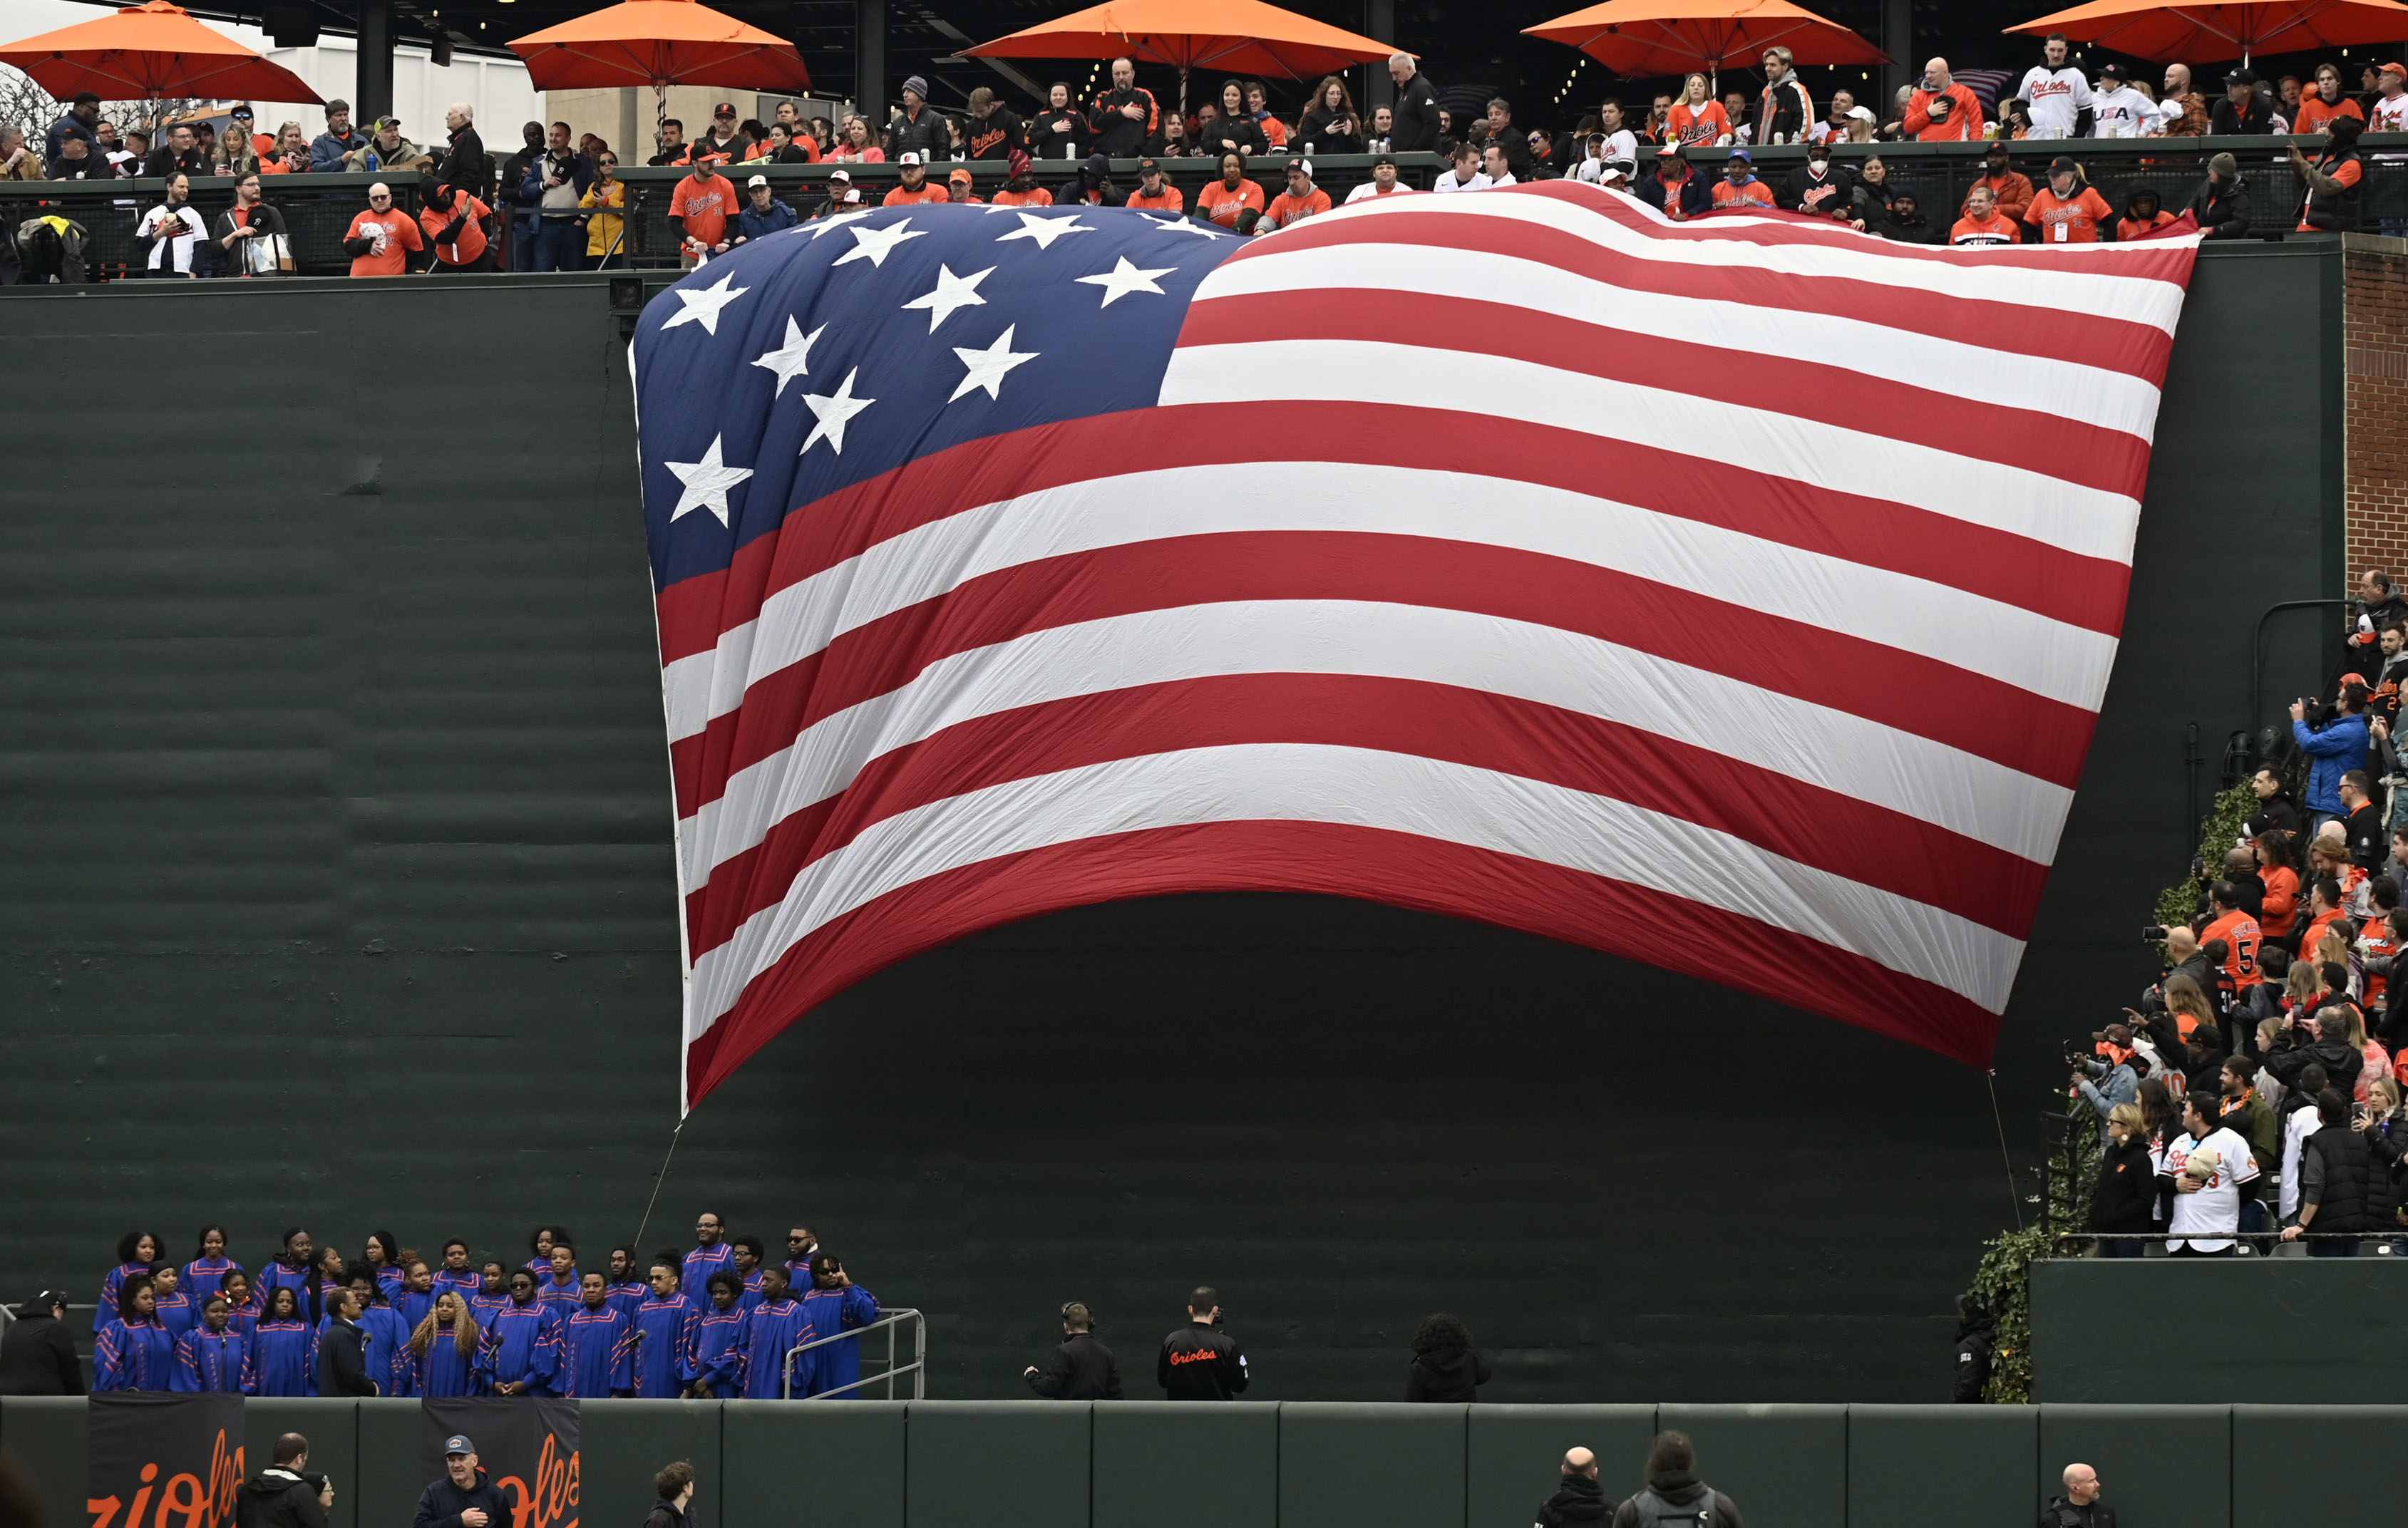 Mar 28, 2024: The 30'x42' Stars from Fort McHenry is lowered from the batter's eye before the singing of the National Anthem by the Moran Sate University Choir on opening day at Oriole Park at Camden Yards. (Kenneth K. Lam/Staff)